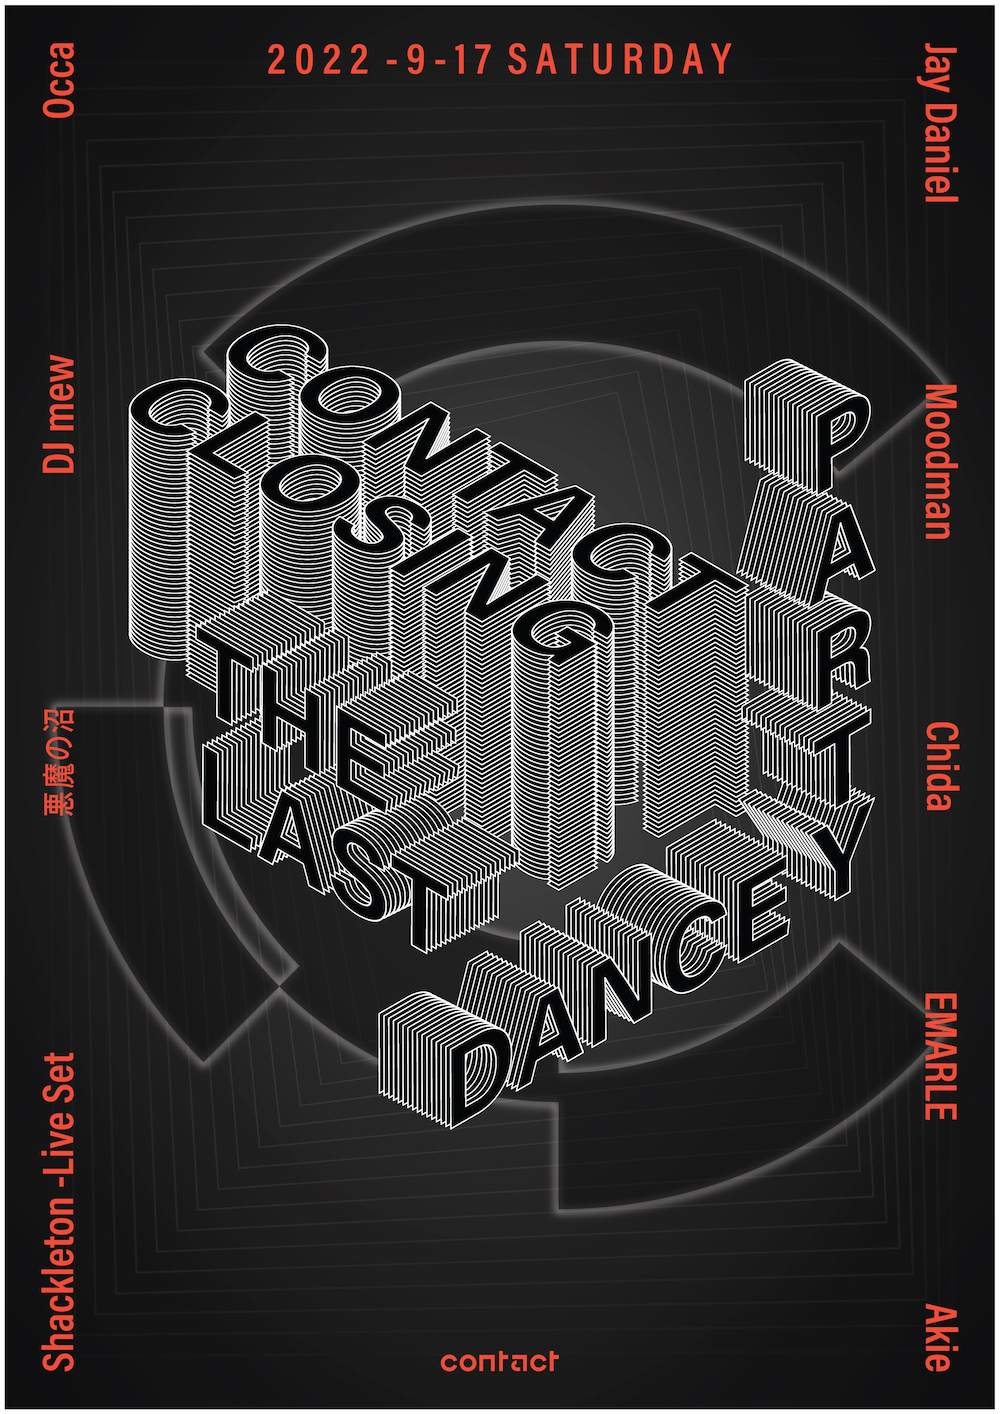 Contact Closing Party The Last Dance - フライヤー表